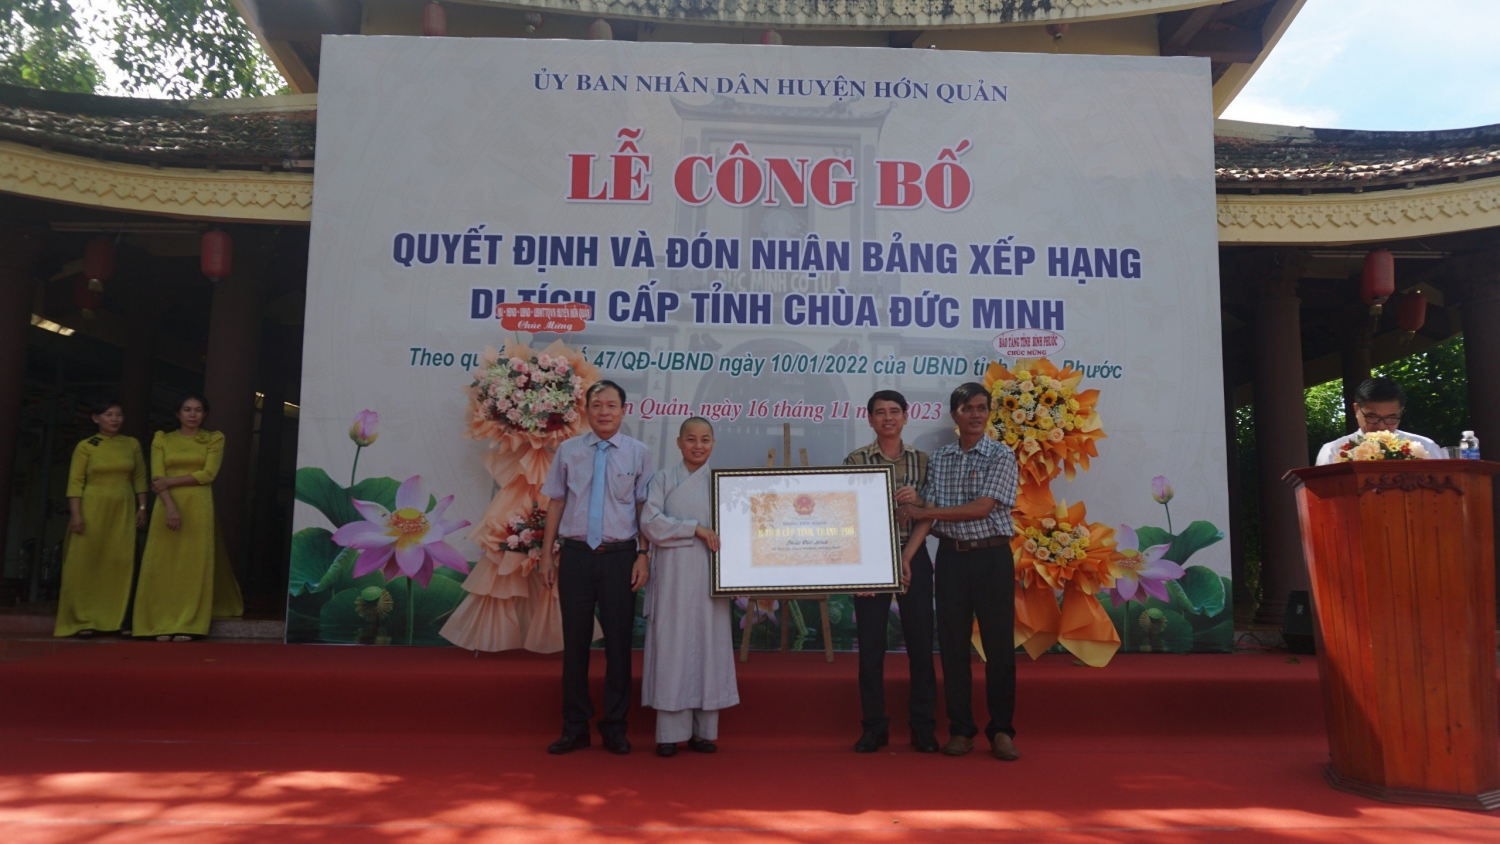 Announcing the Decision and awarding the ranking certificate of Duc Minh Pagoda as a provincial relic